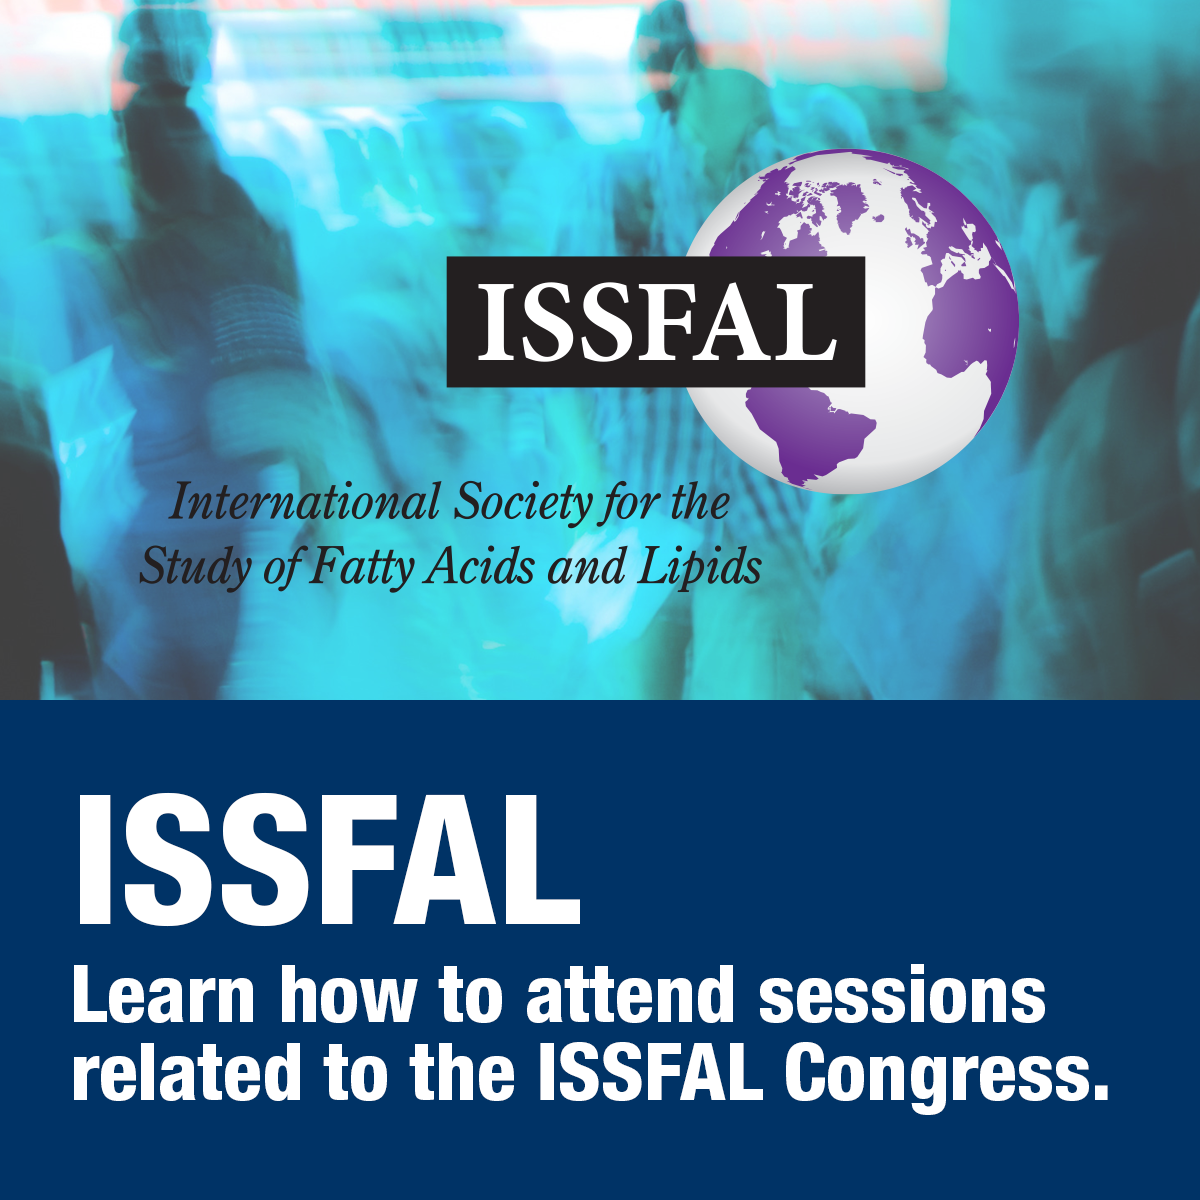 Learn how to view ISSFAL Congress sessions